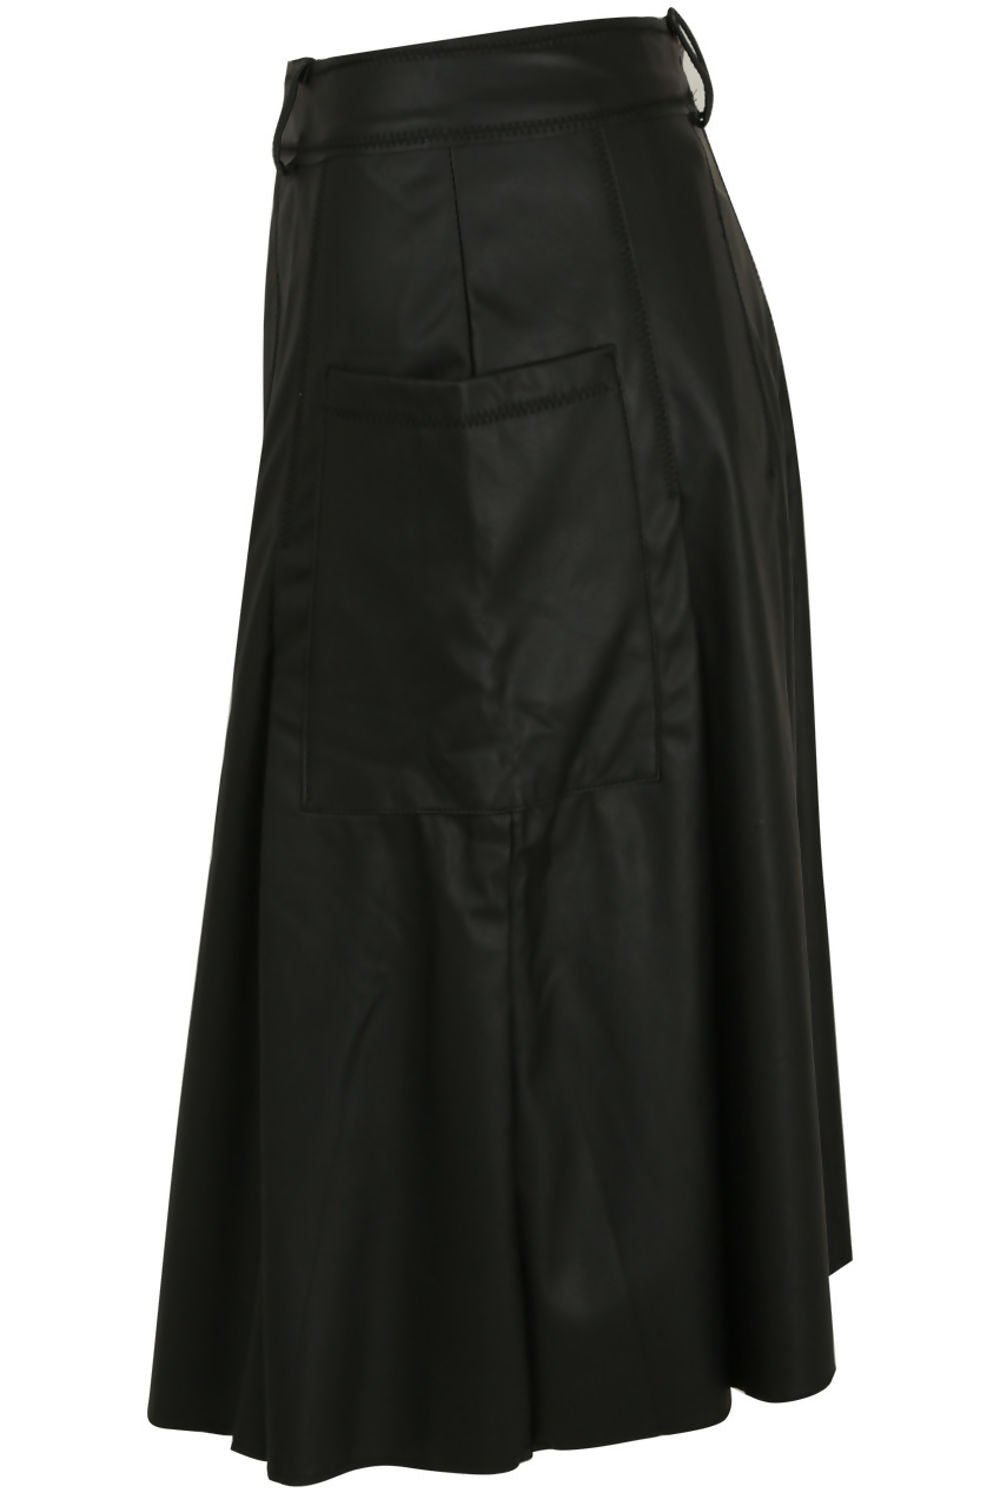 Ghost manequin wears black long  faux leather shorts  with side pockets.  The manequin stands to the side and the side of the skirt is visible, including the side pocket detailing. 